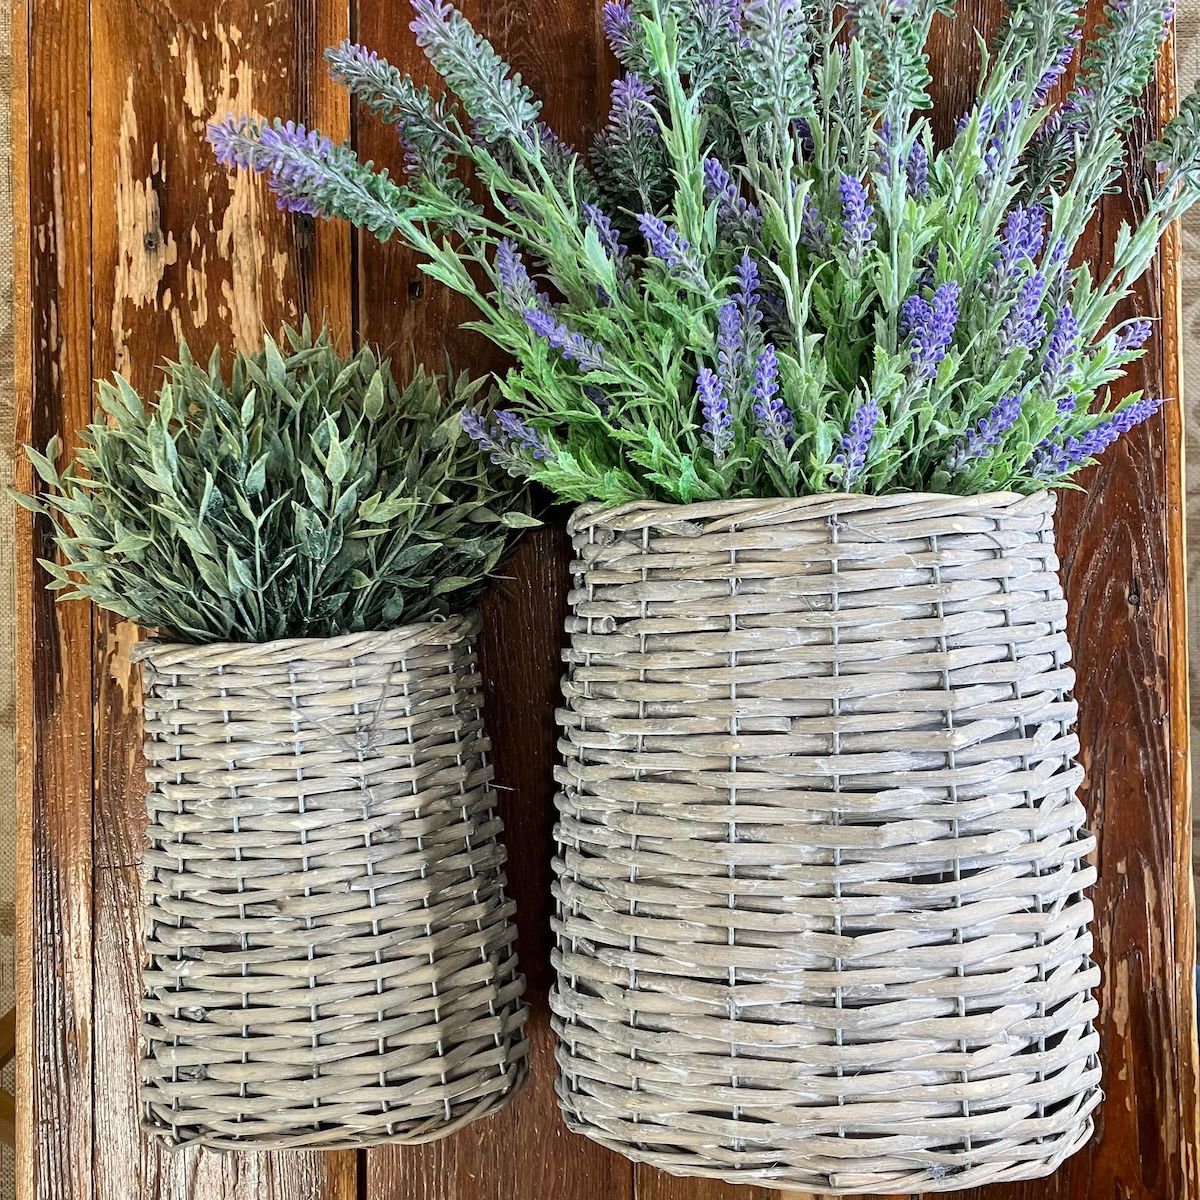 Set of 2 Woven Willow Baskets in 2 sizes, displayed with greenry and lavender